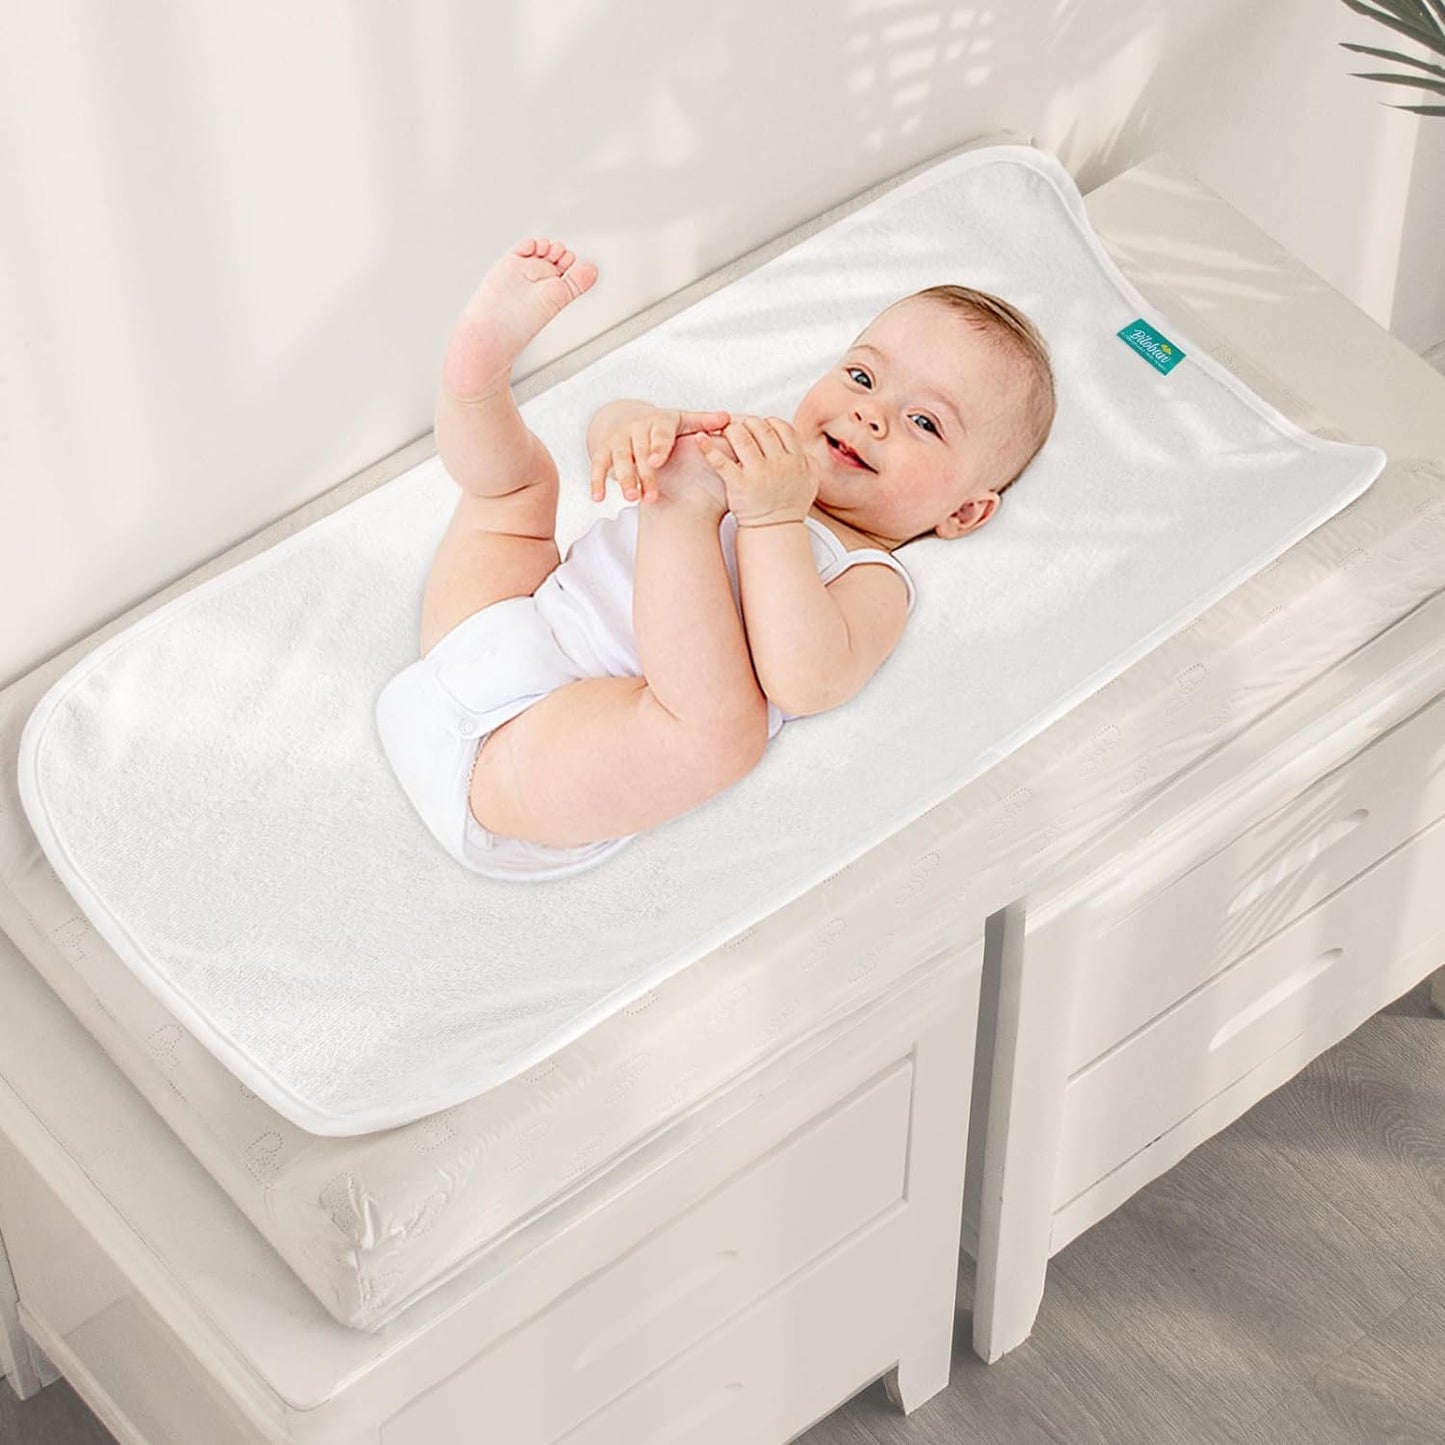 Changing Pad Liners - 5 Pack, Cotton, Waterproof & Absorbent & Skin-Friendly, Diaper Mat